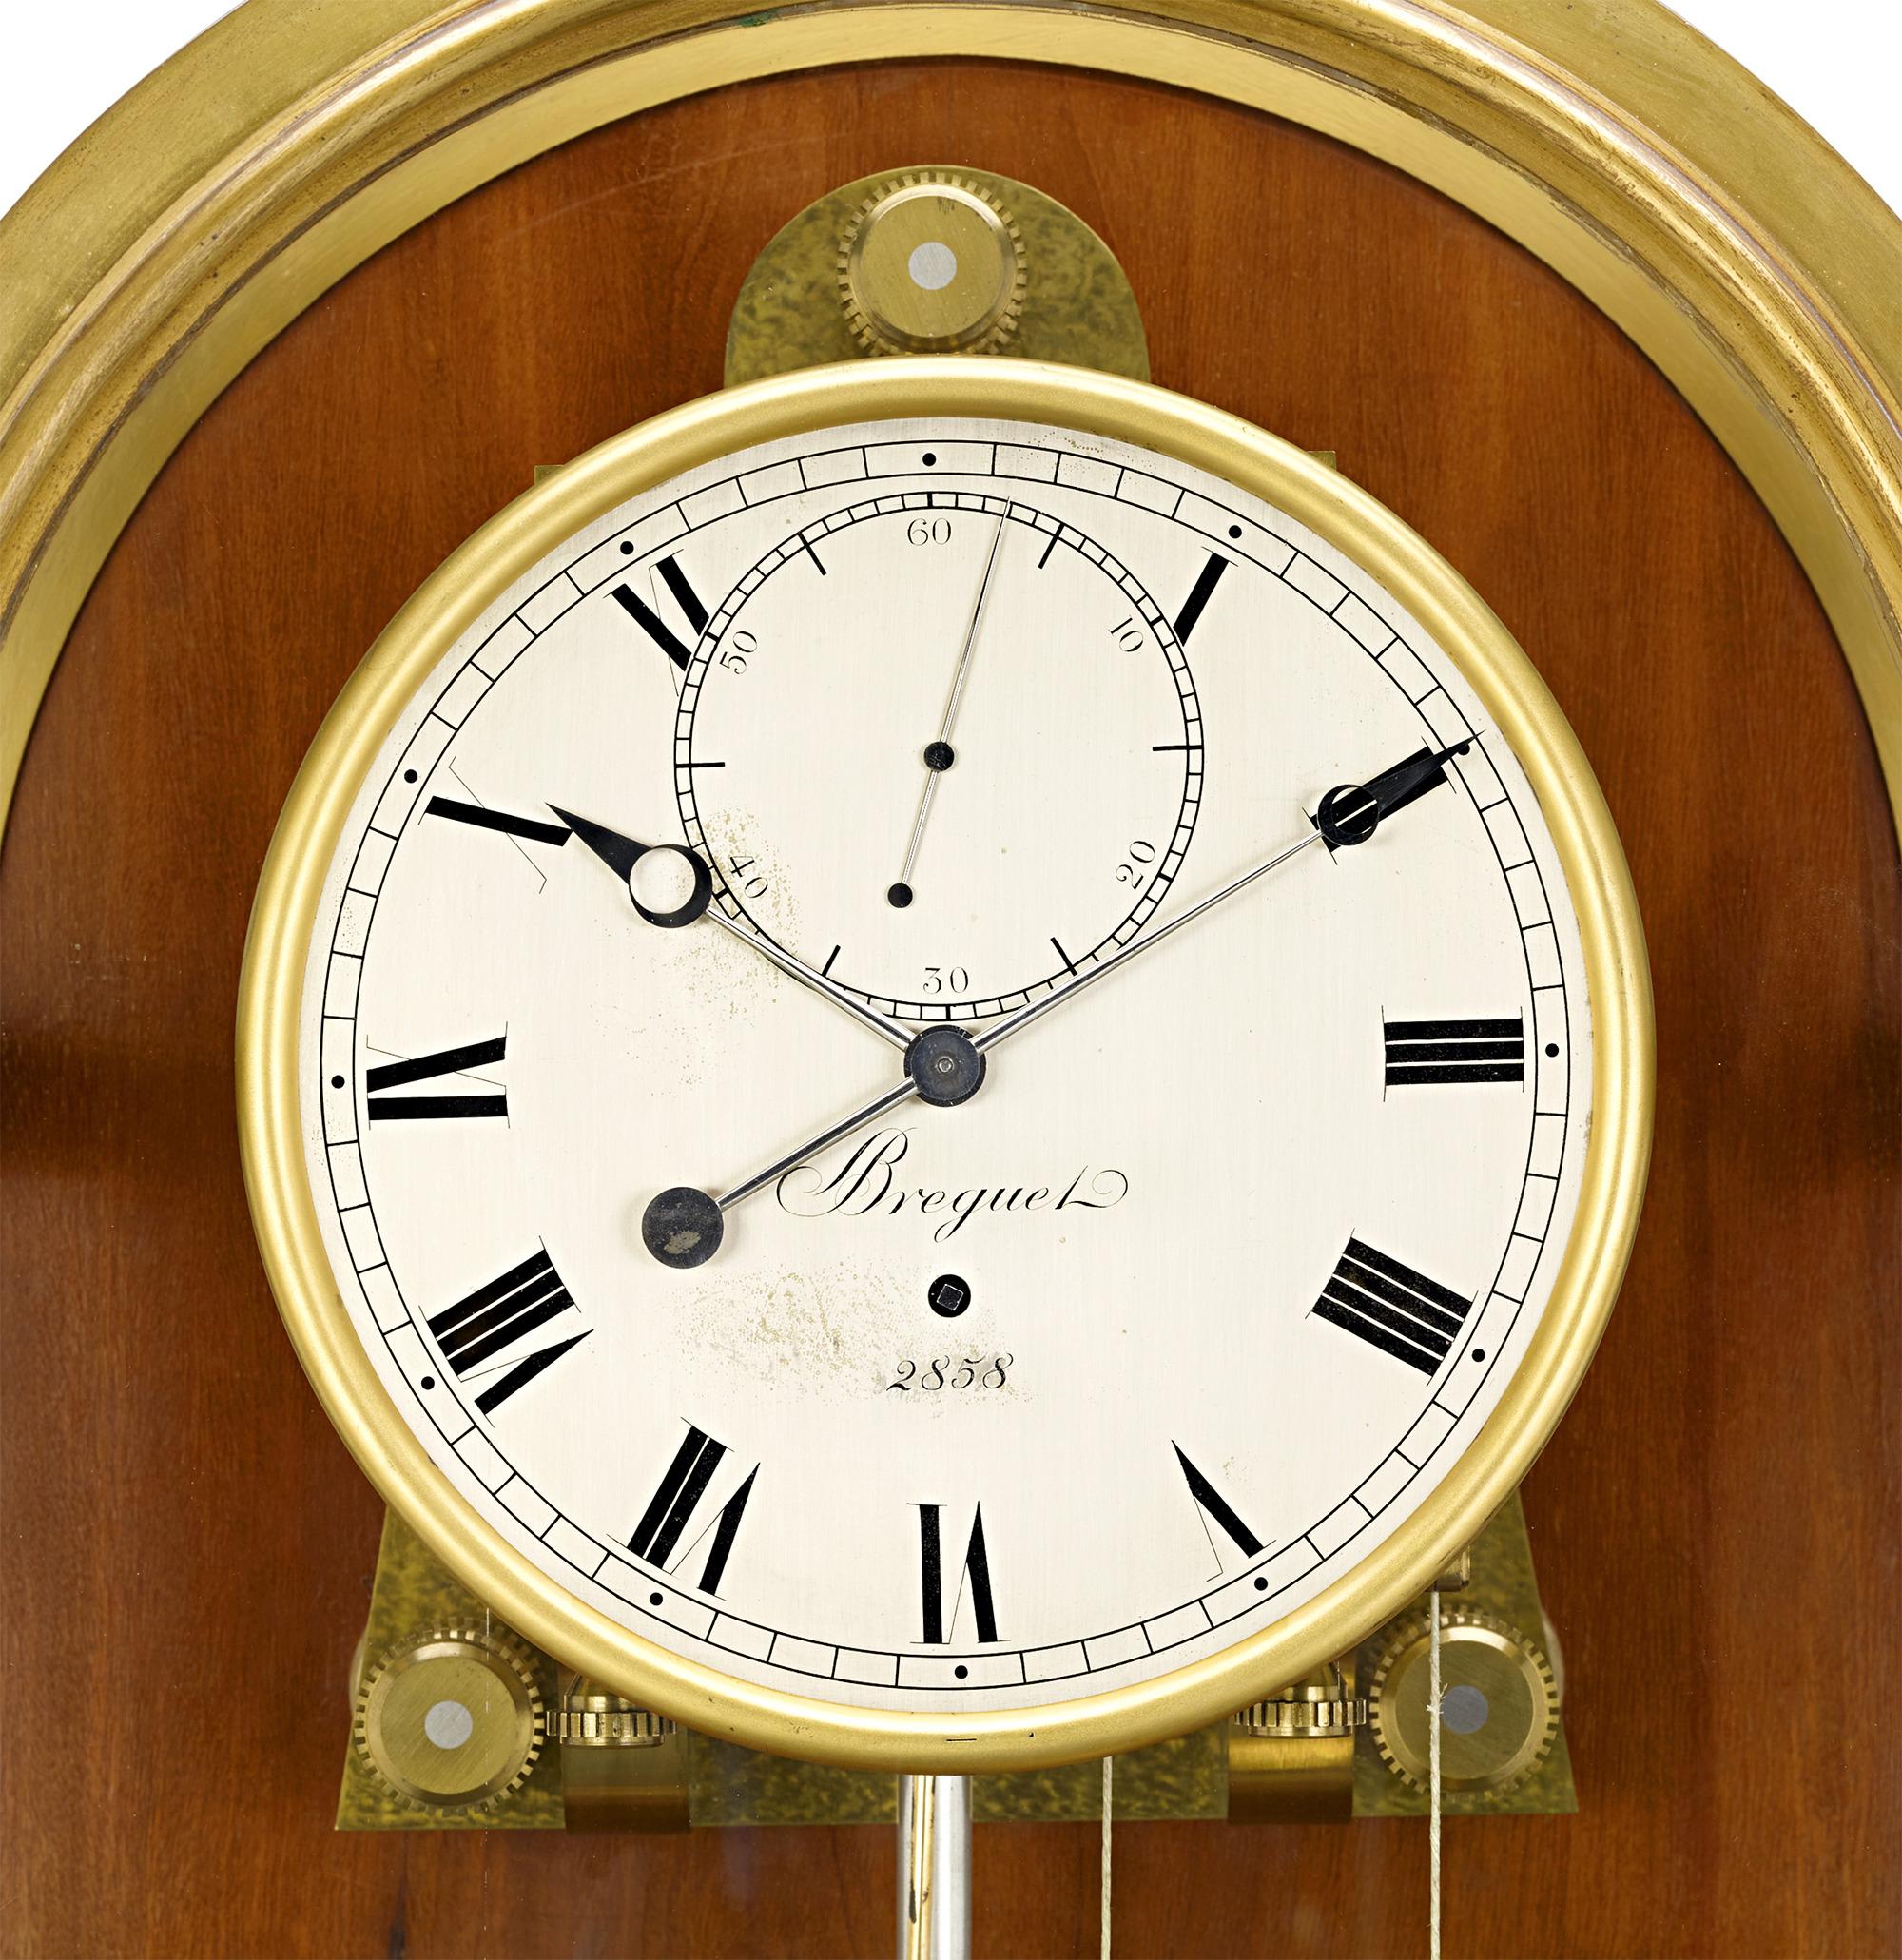 Breguet Month-Going Long Case Regulator Clock In Excellent Condition For Sale In New Orleans, LA